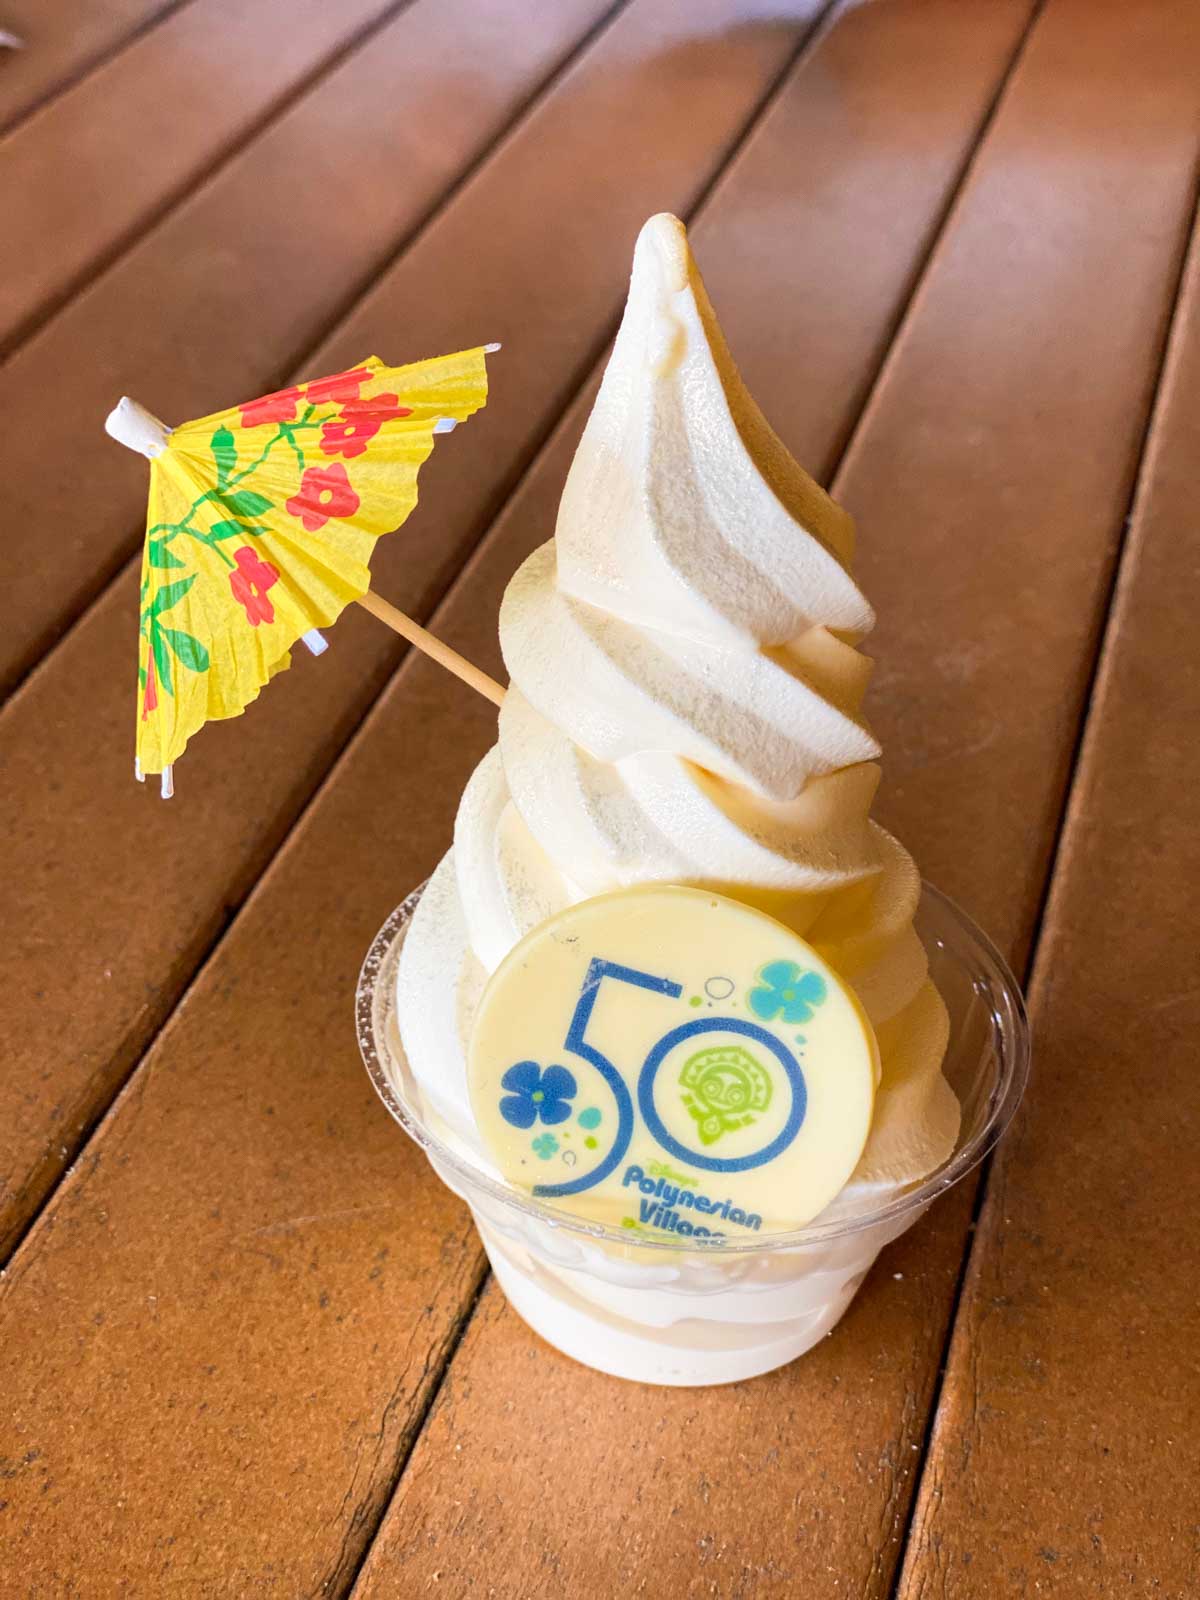 A frozen Dole whip with a yellow umbrella and a 50th anniversary chocolate coin.